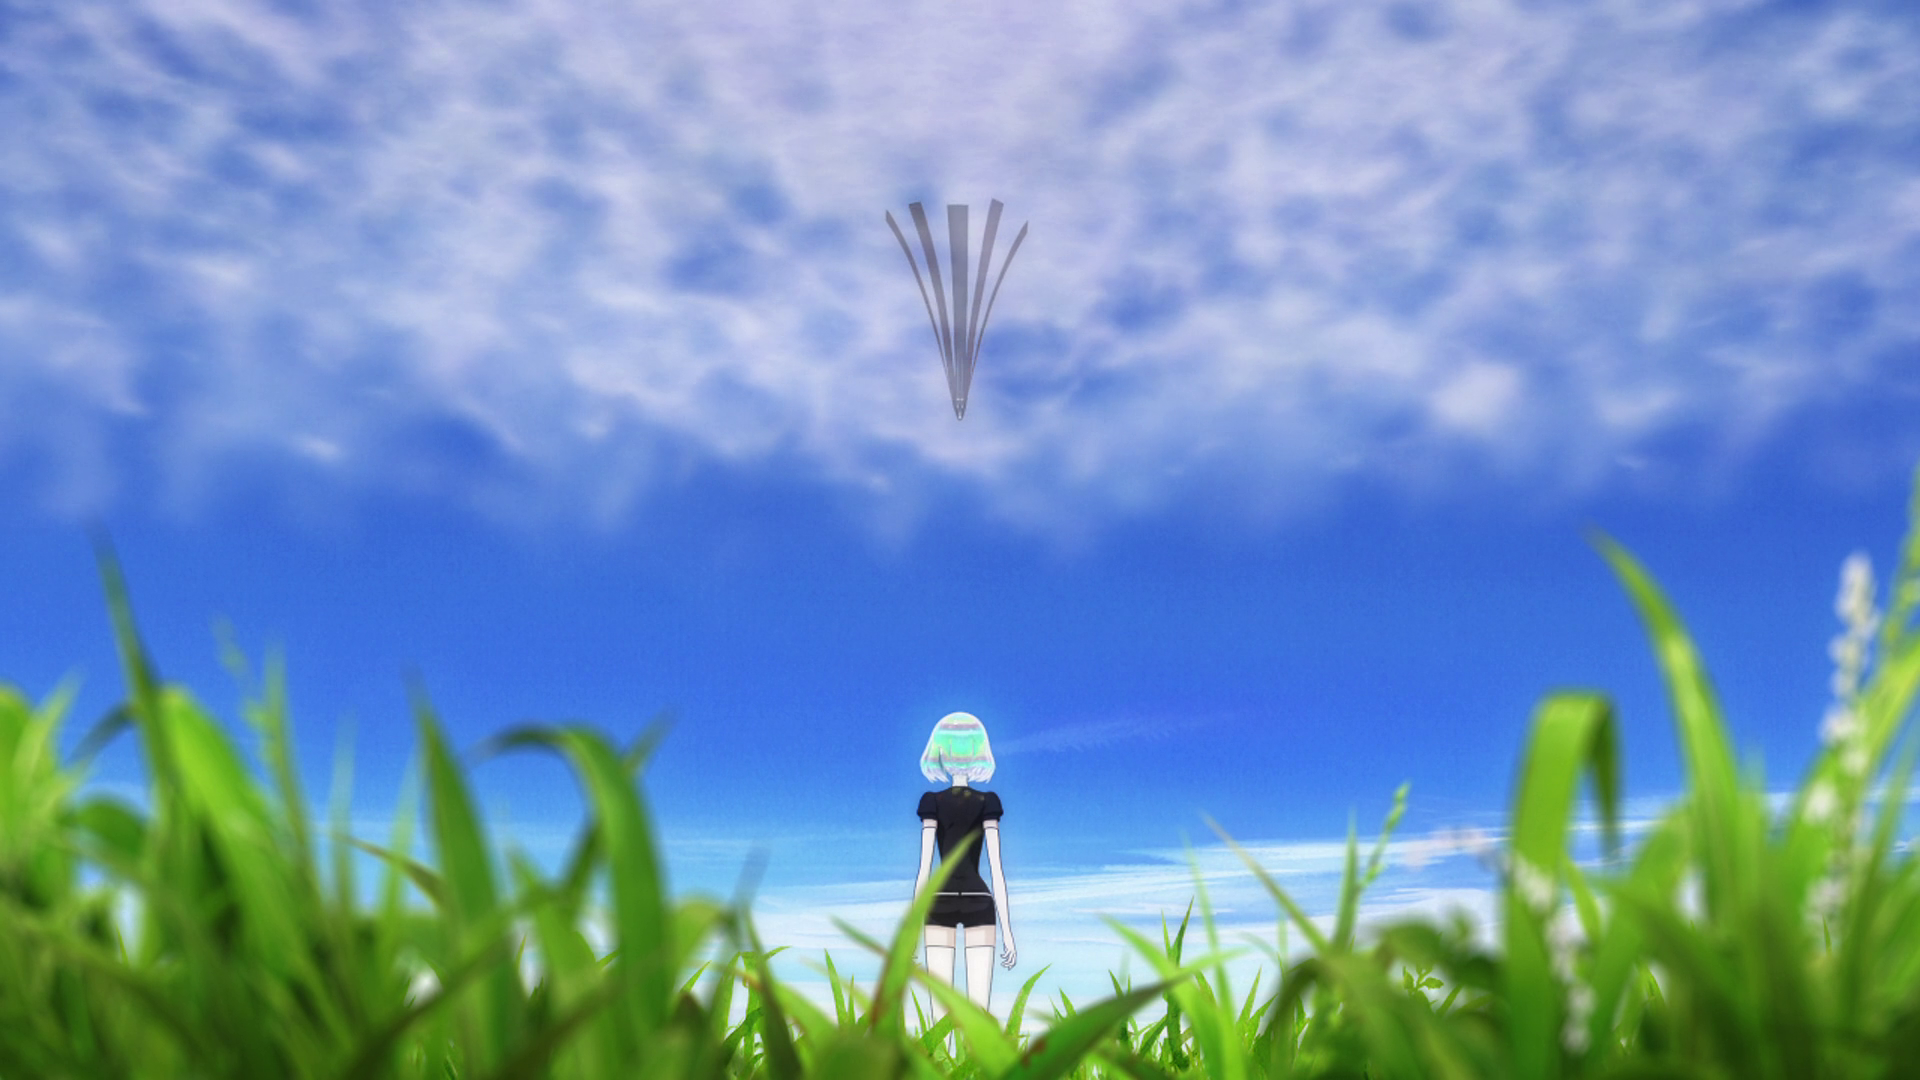 Transformation; Land Of The Lustrous, Episodes 2 3. Isn't It